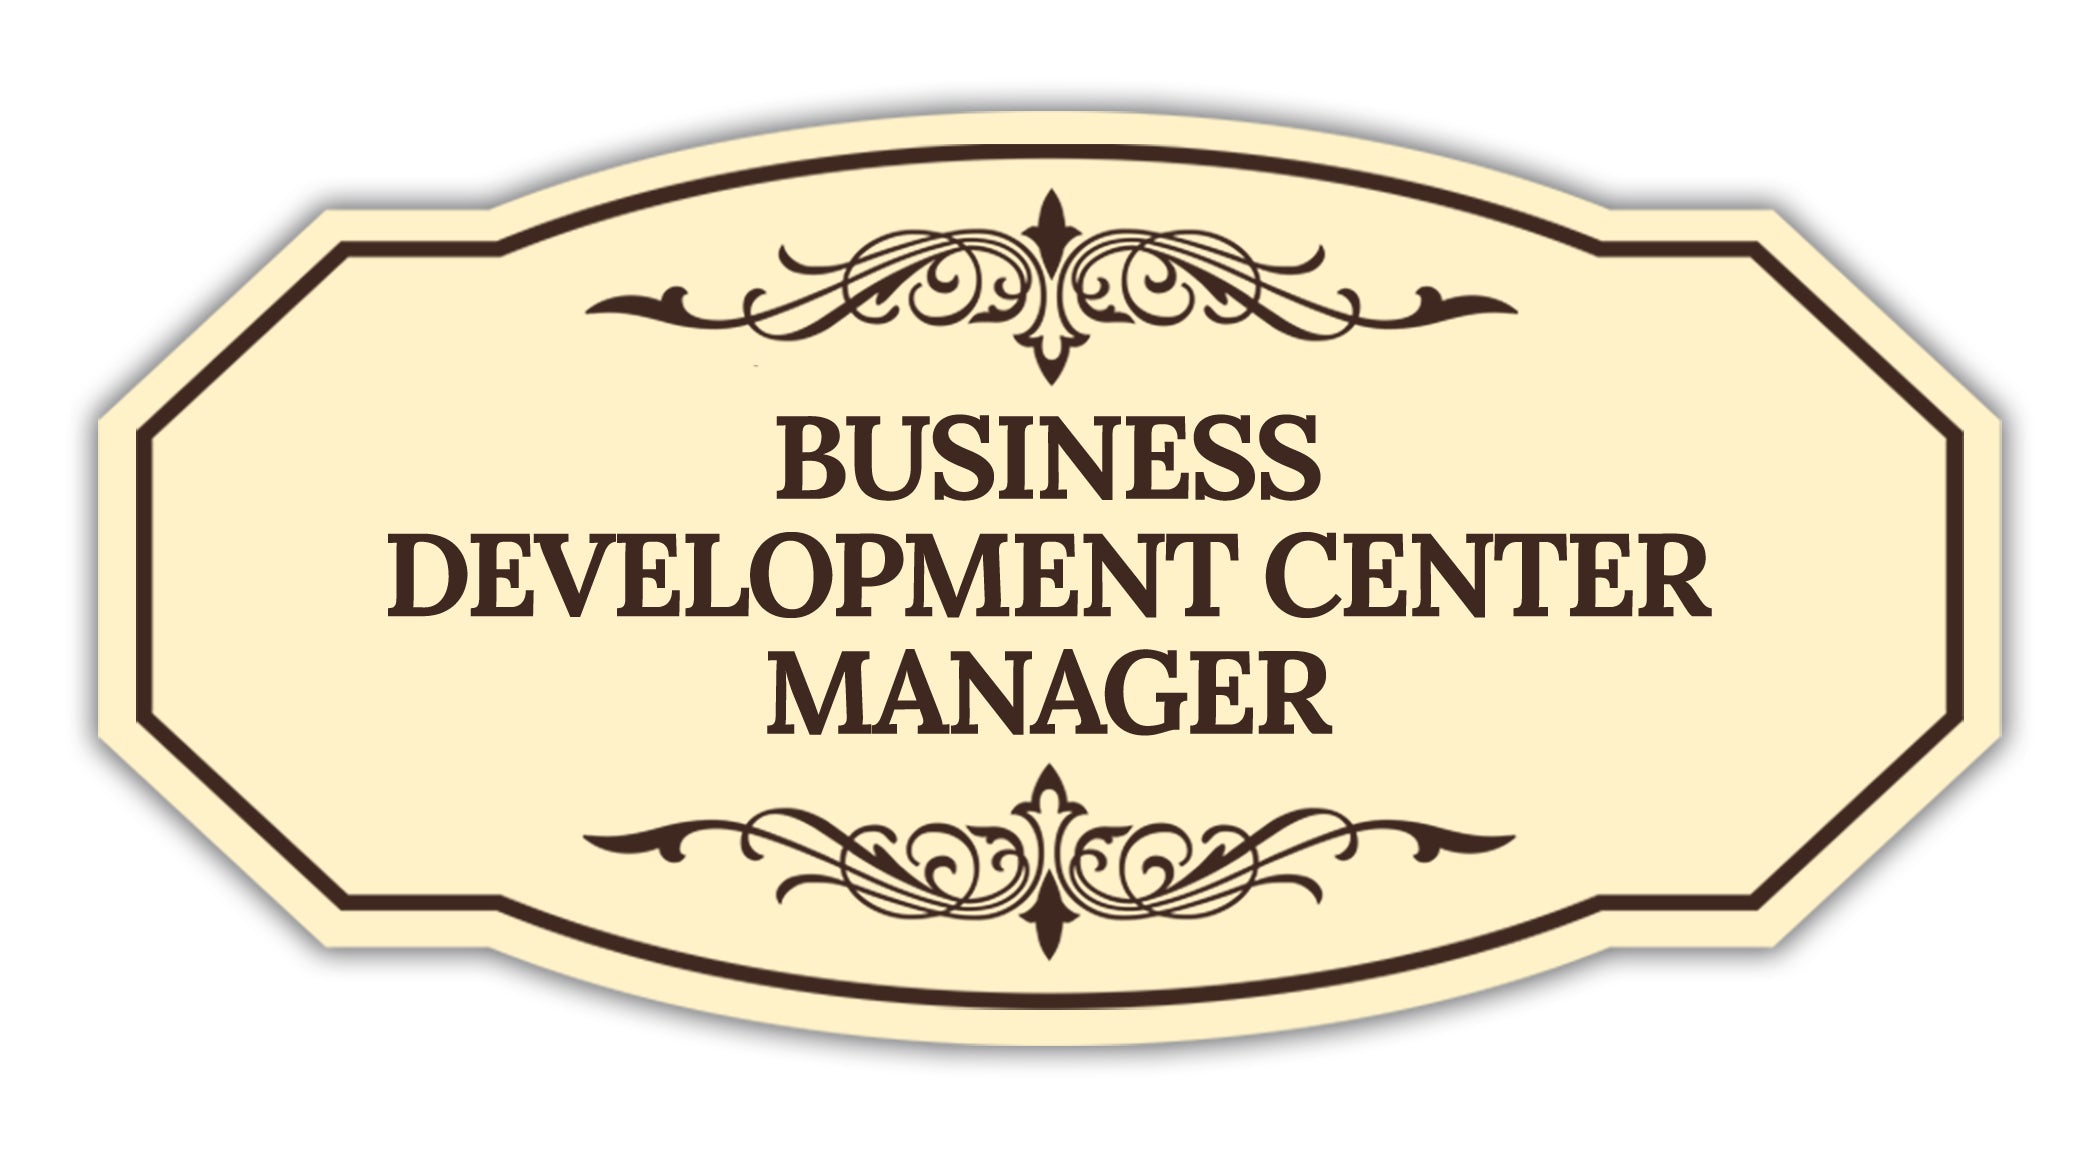 Signs ByLITA Victorian Business Development Center Manager Graphic Wall or Door Sign